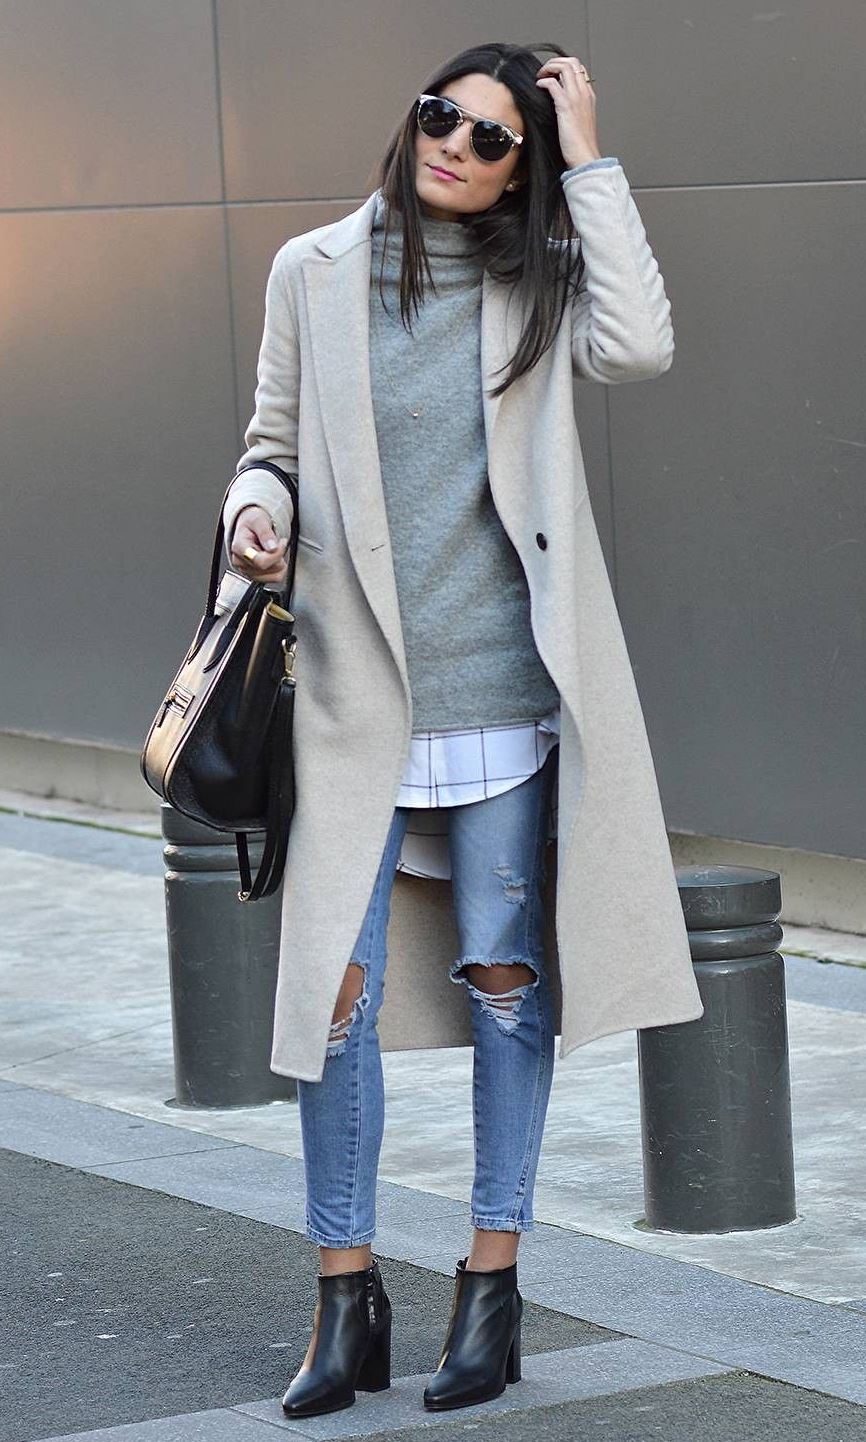 amazing winter outfit / coat + sweater + shirt + bag + ripped jeans + boots